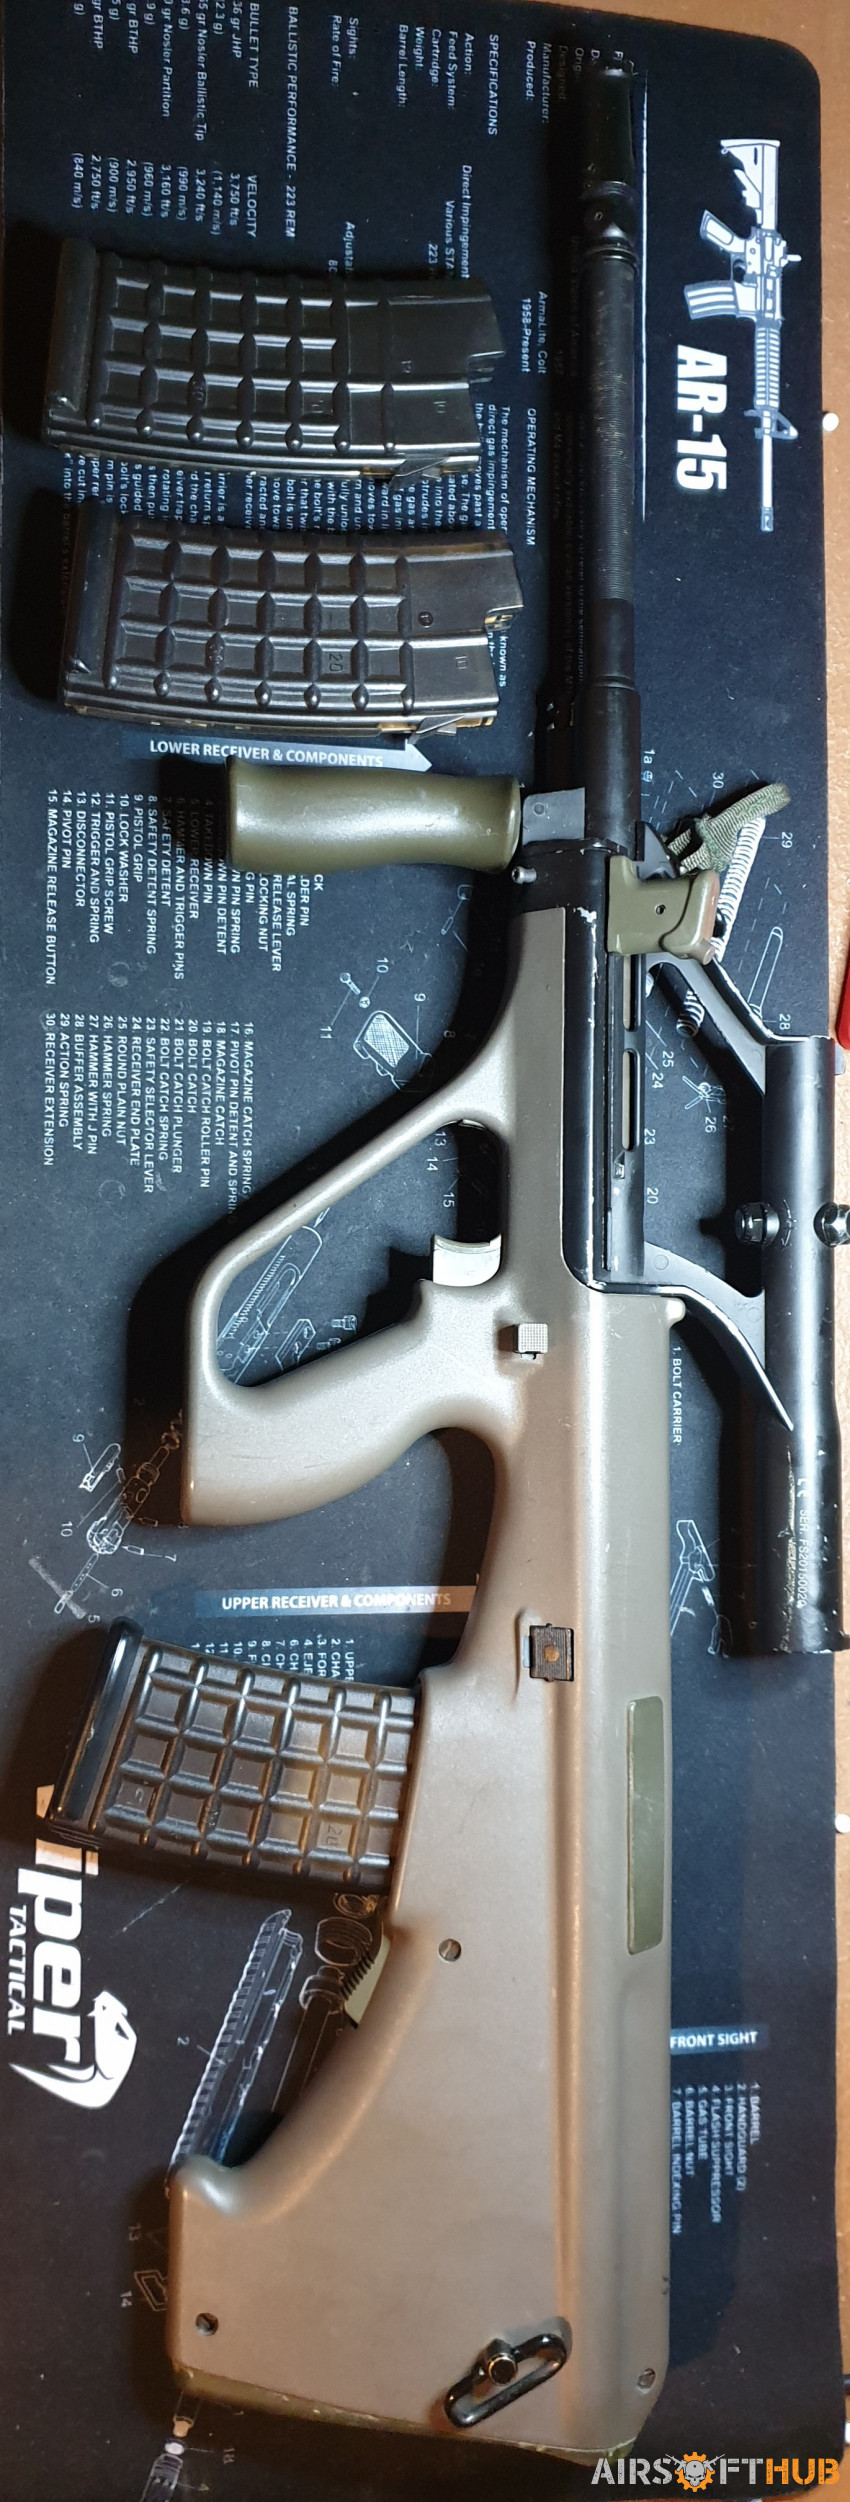 Clasic arms aug - Used airsoft equipment